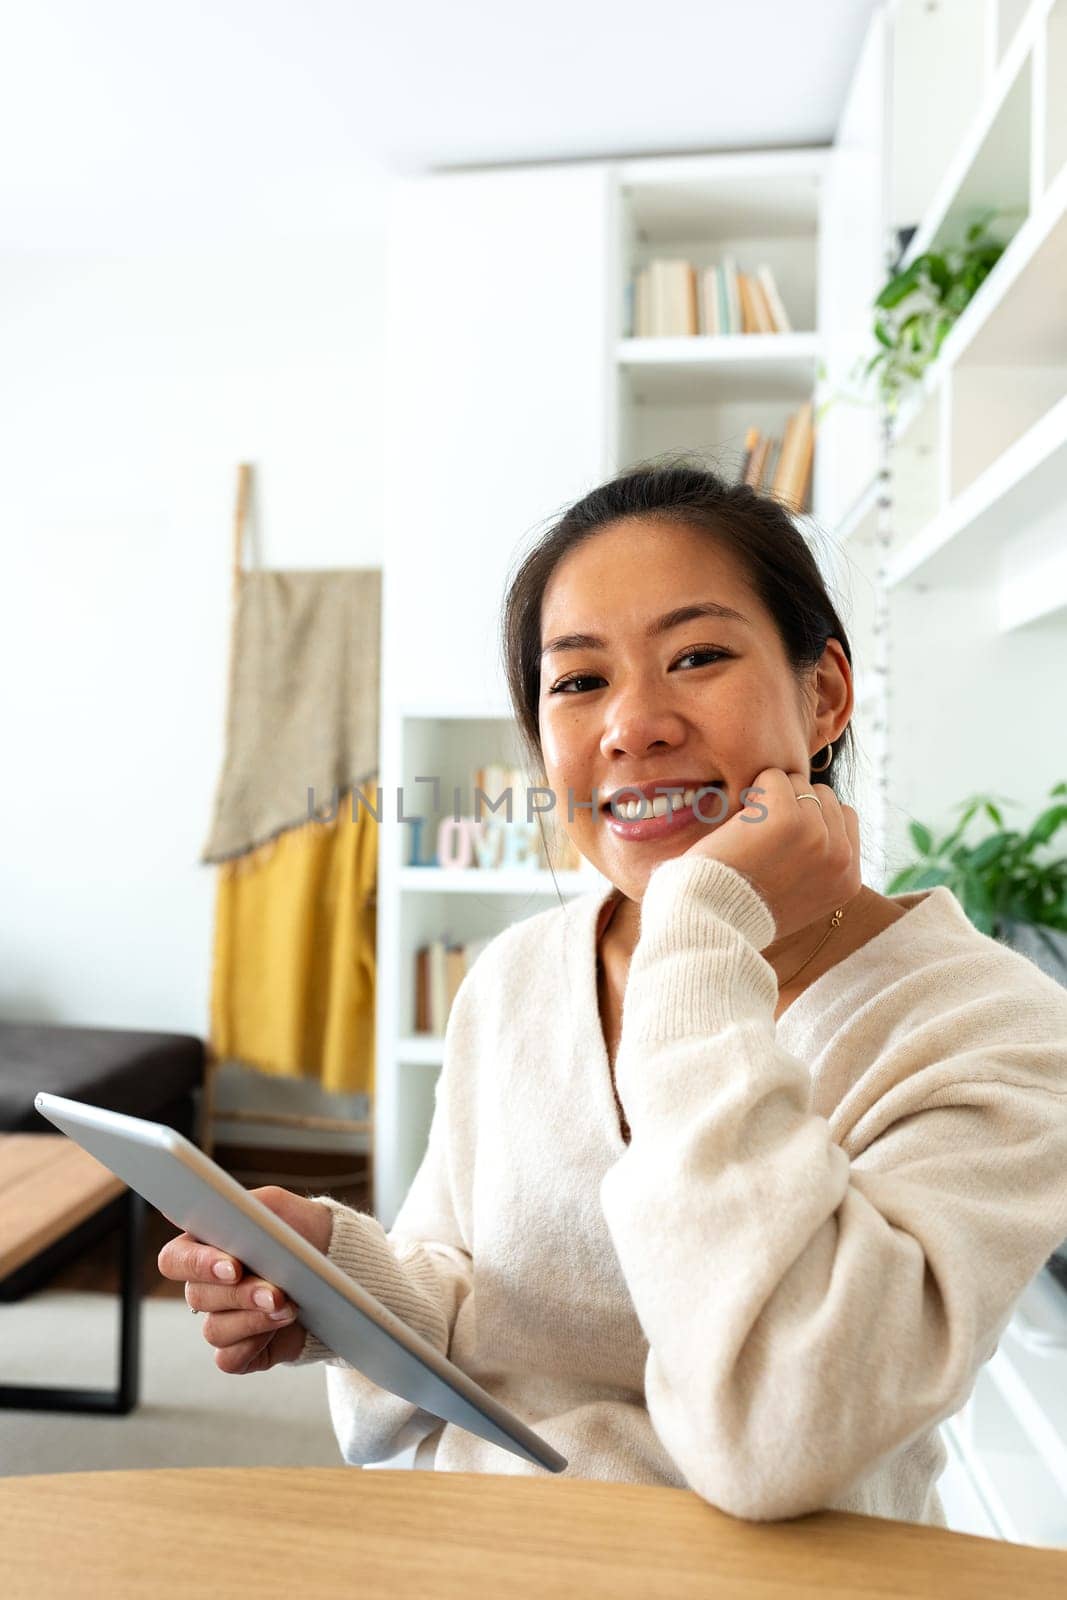 Happy young Asian woman working at home office holding tablet looking at camera.Technology concept.